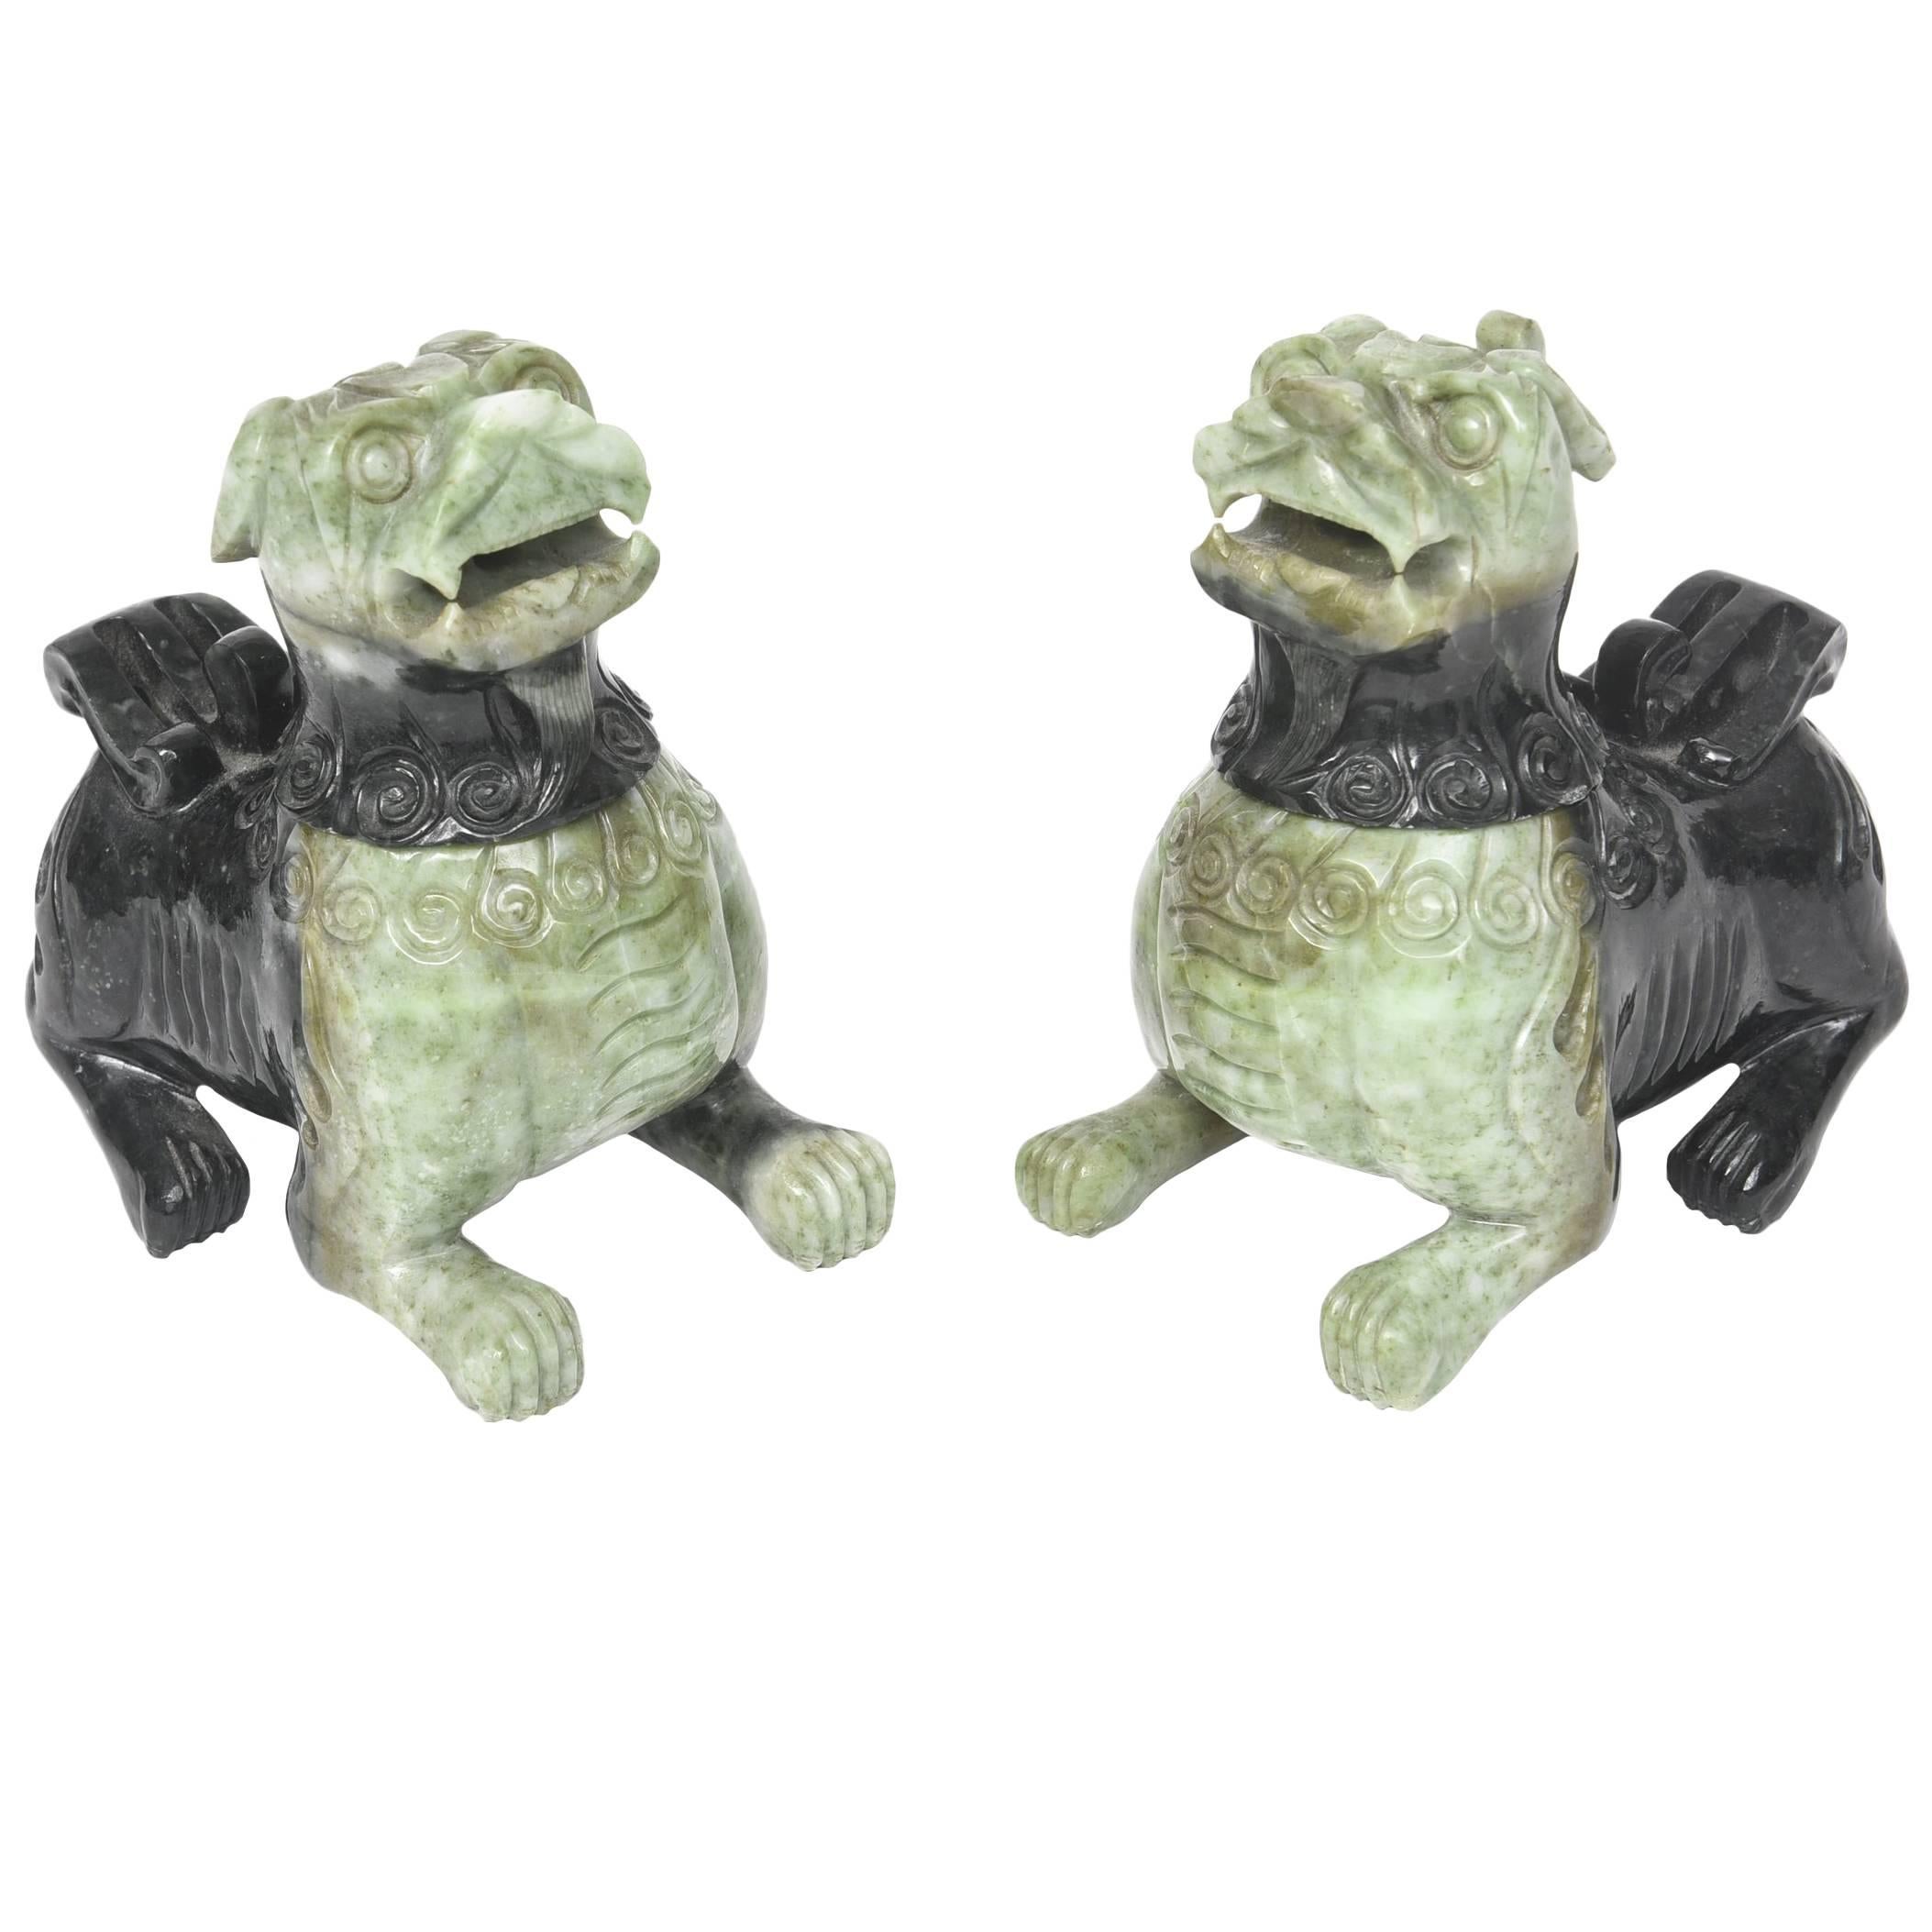 Mid-20th Century Pair of Chinese Carved Green Hardstone Foo Dogs / Lions